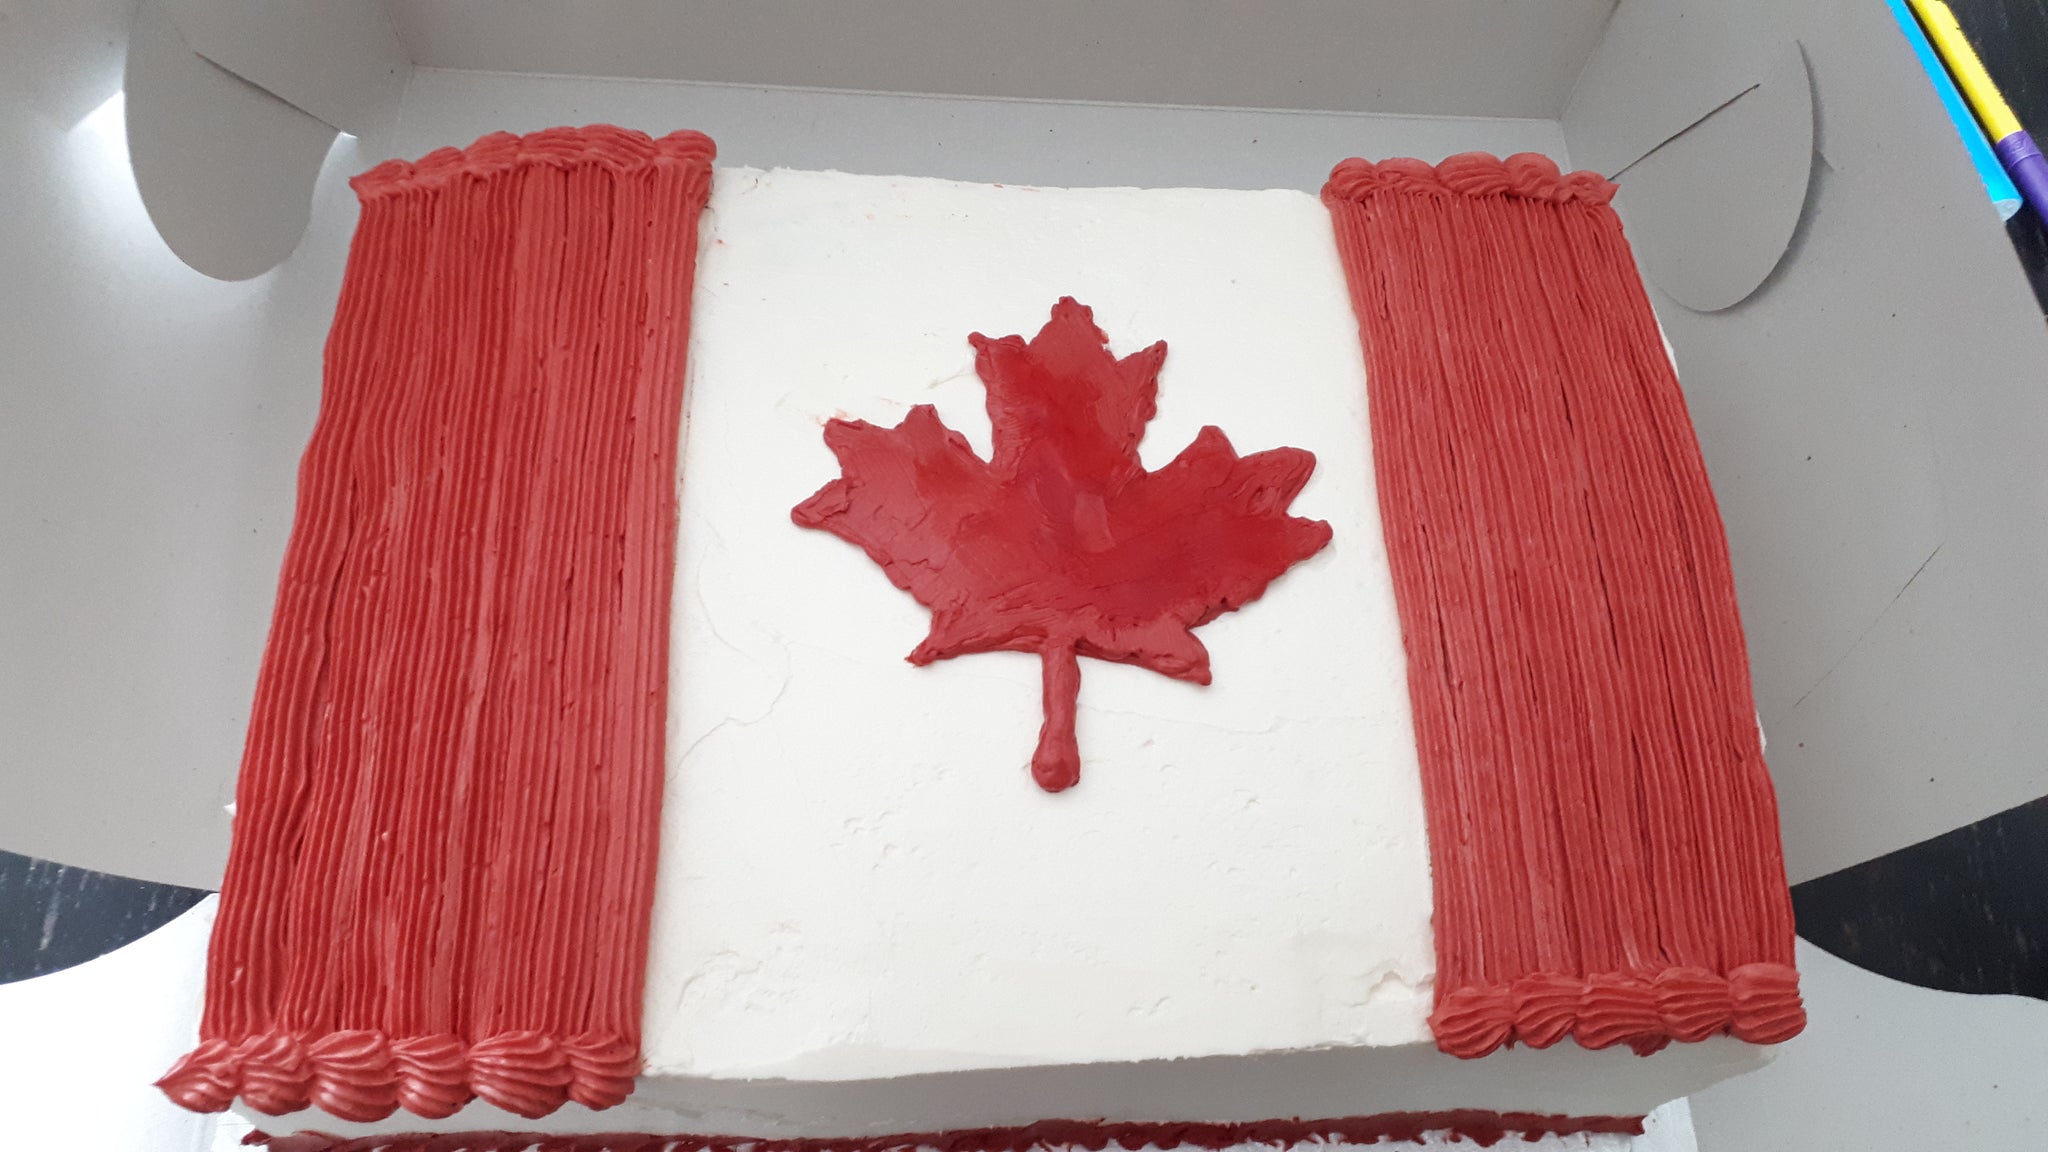 Happy Canada Day celebration cake Photograph by Milleflore Images - Pixels